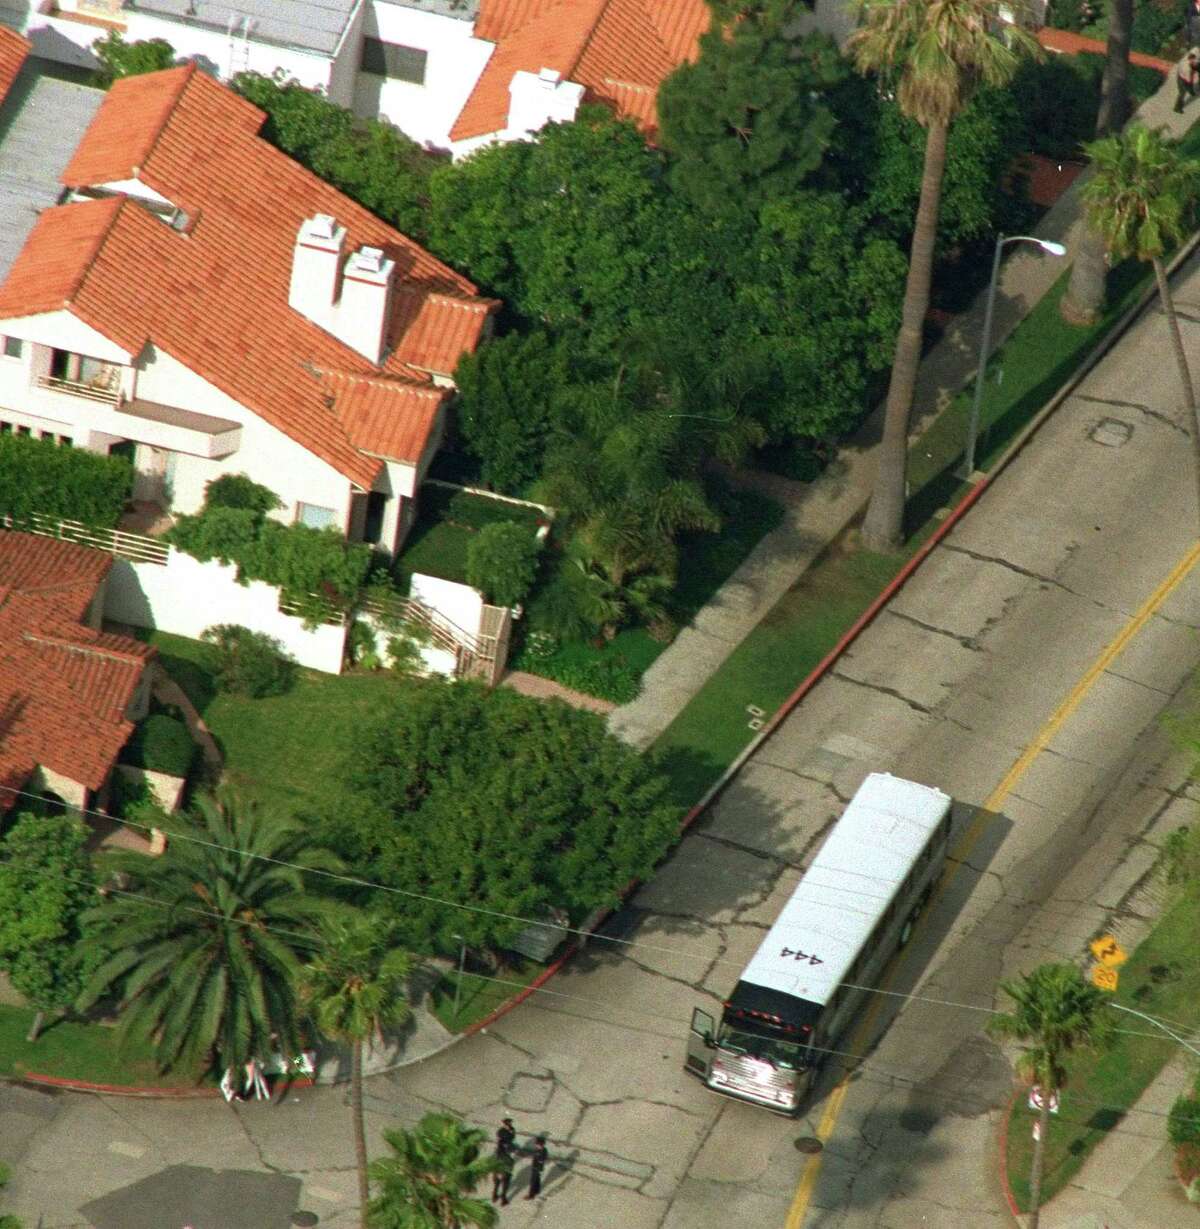 FILE: An aerial view shows Nicole Brown Simpson's condo, top with two chimneys, during a visit by principals in the O.J. Simpson double-murder trial on Bundy Drive in the Brentwood area of Los Angeles Sunday, February 12, 1995. Detectives are investigating a knife purportedly found some time ago at the former home of O.J. Simpson, who was acquitted of murder charges in the 1994 stabbings of his ex-wife Nicole Brown Simpson and her friend Ron Goldman, Neiman said Friday. (AP Photo/Mark J. Terrill)